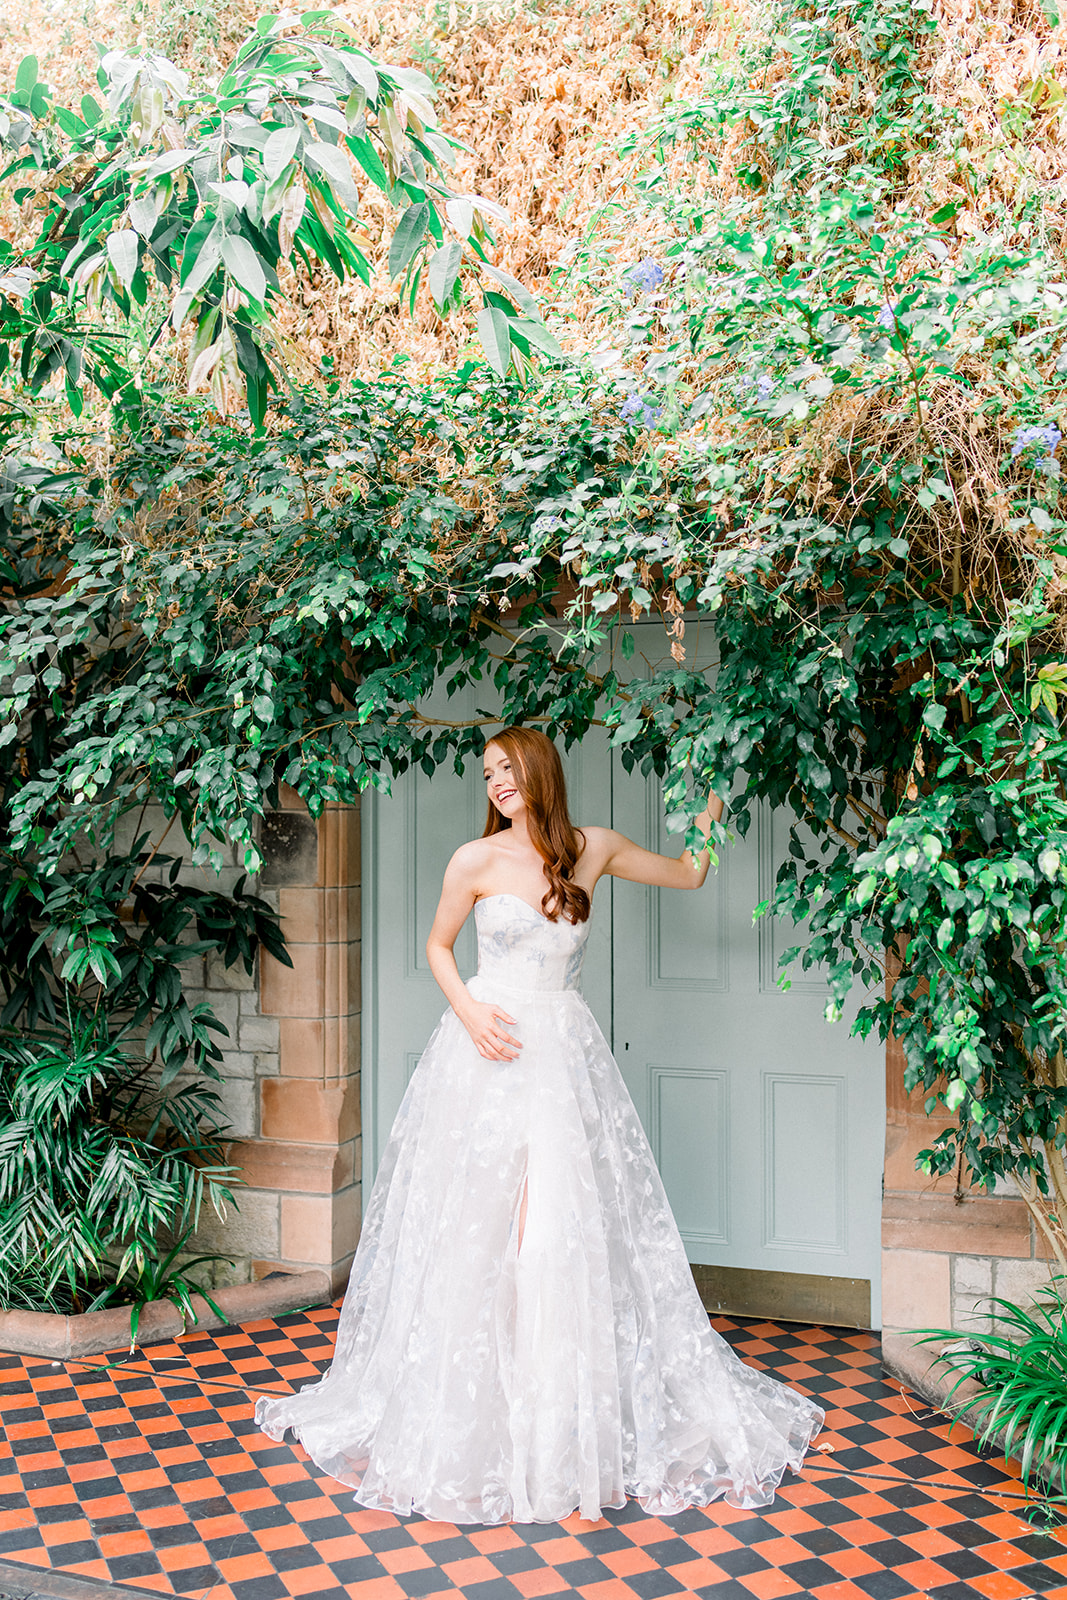 Bride in a Rami Al Ali gown touching the delicate fabric, epitomizing destination wedding luxury in Ireland's Castle Les